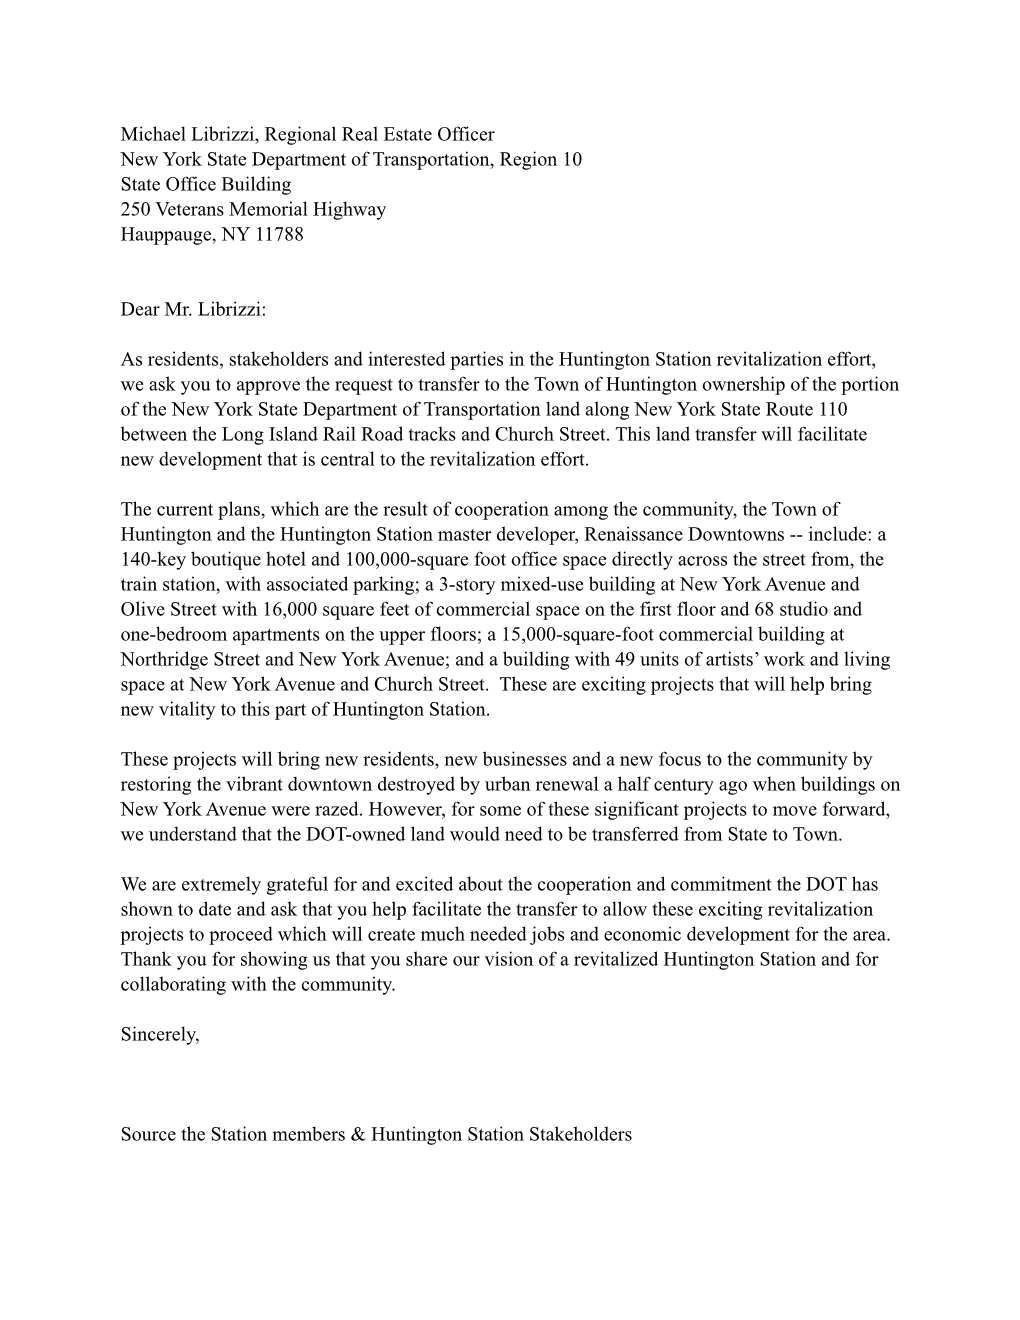 Community Letter to DOT 7-13-15.Pages